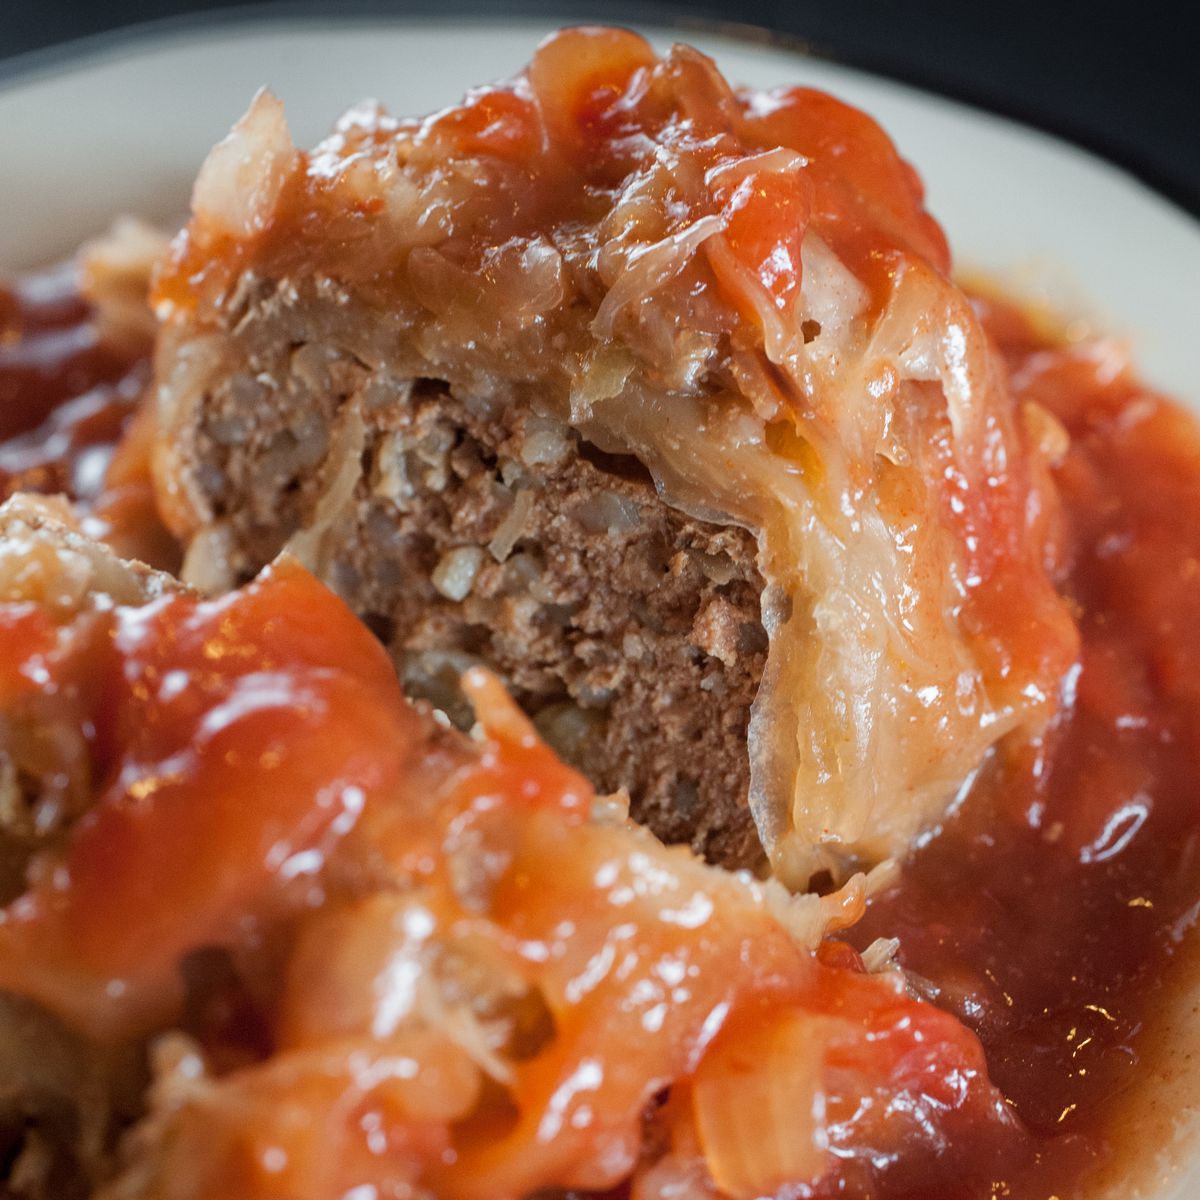 A piece of stuffed cabbage that’s stuffed with meat and covered in a tomato sauce at Kenny &amp; Ziggy’s.